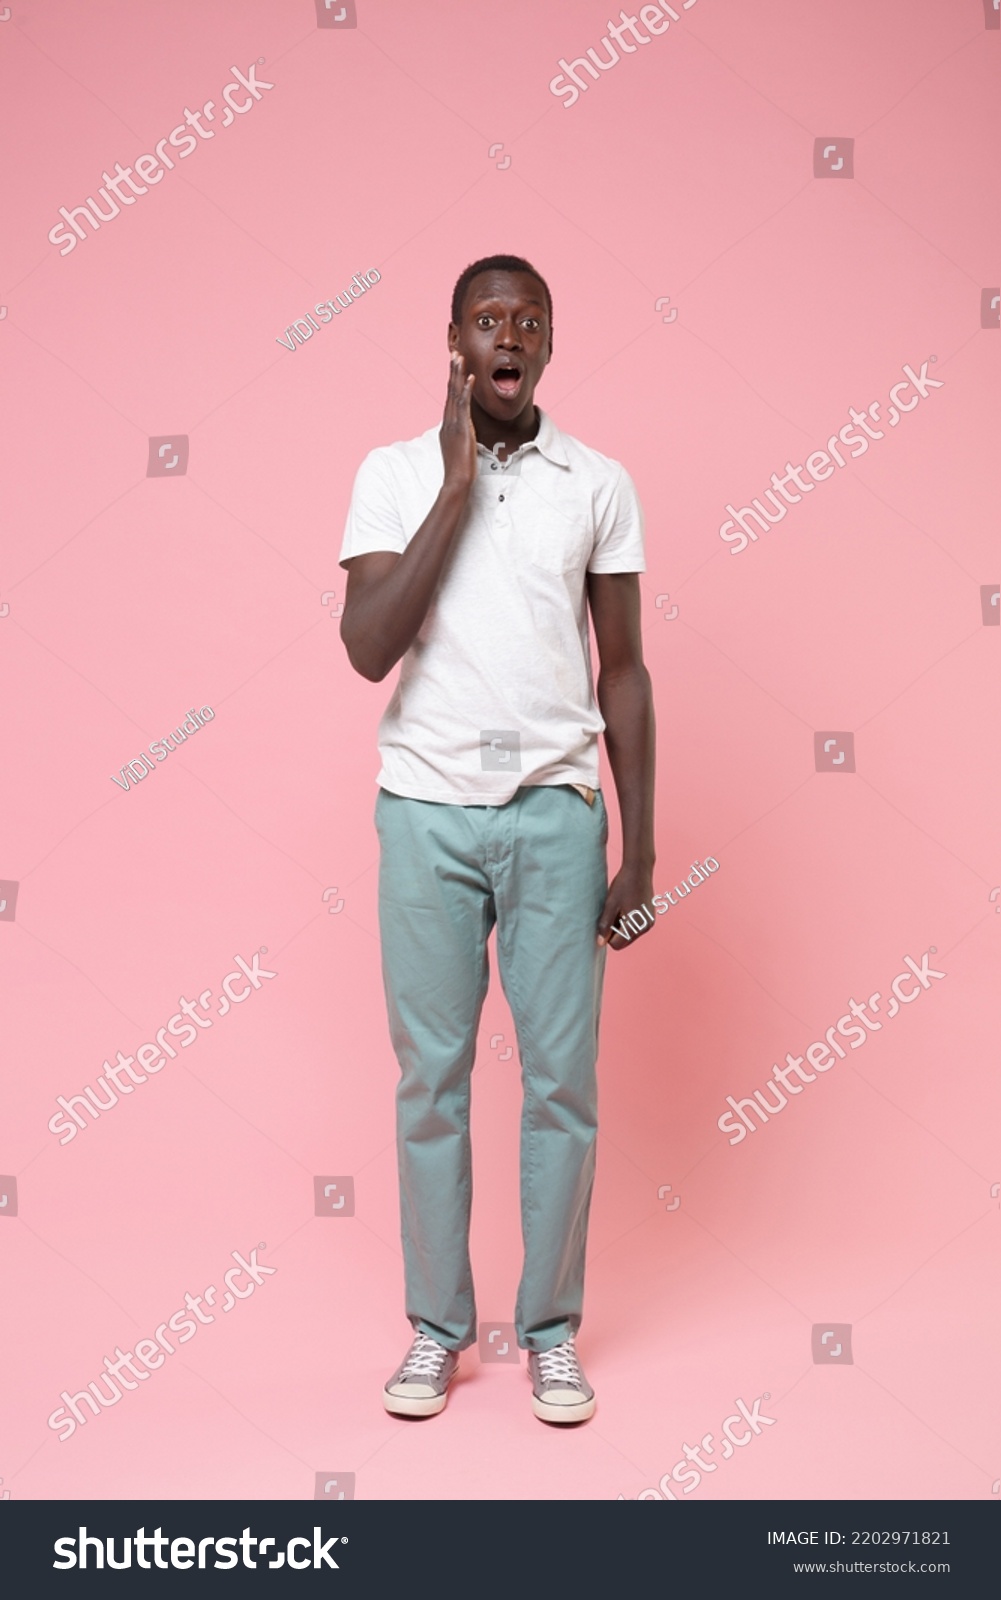 Full length vertical photo of shocked amazed surprised young man 20s he wear white shirt blue trousers put hand on cheek isolated on plain pastel light pink background studio. People lifestyle concept #2202971821